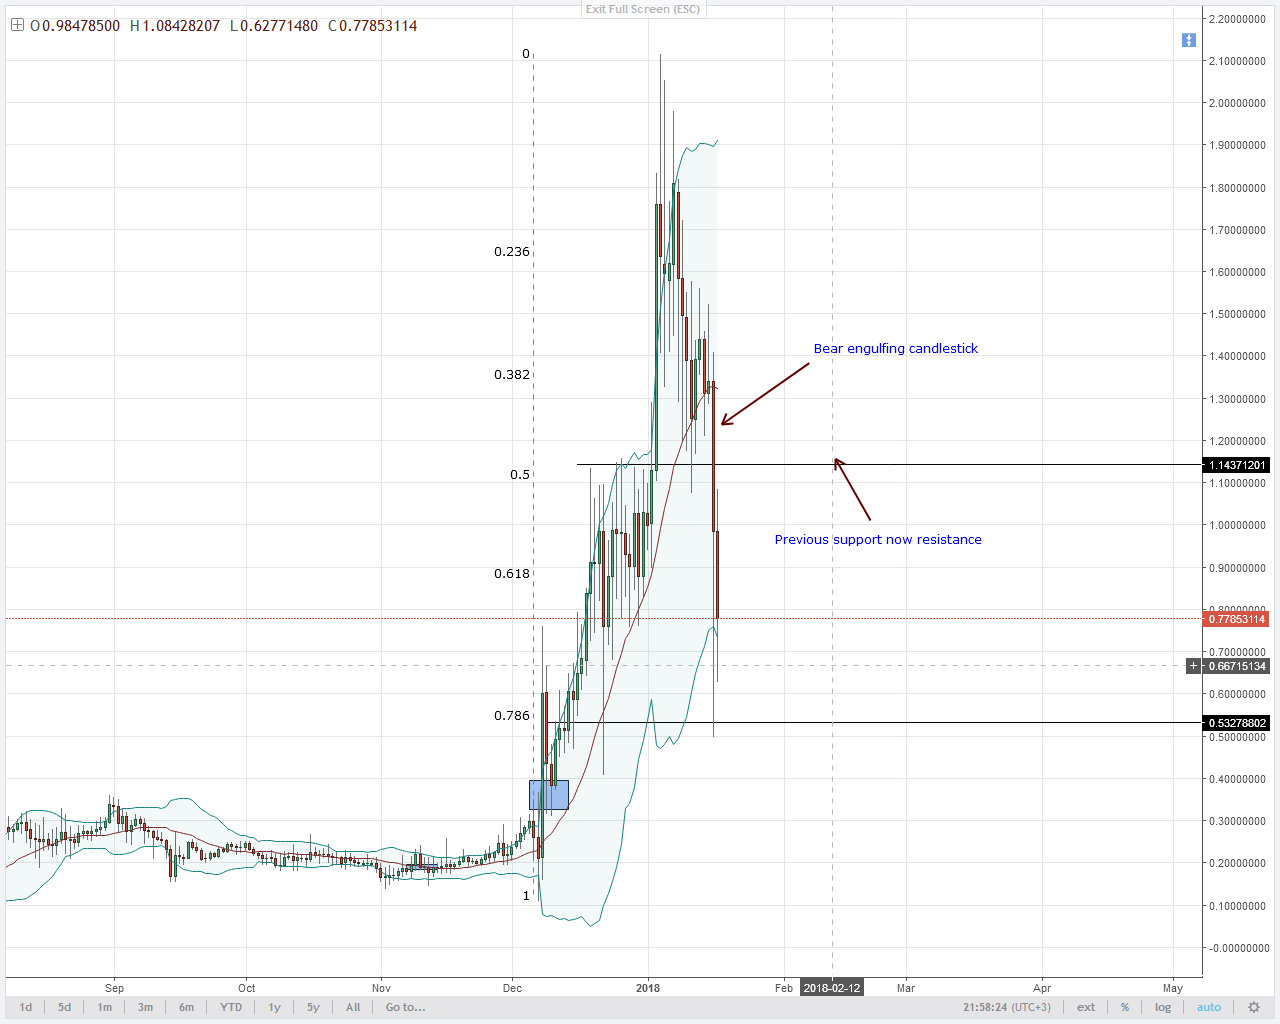 NEM SLOWS DOWN WITH POTENTIAL SUPPORT AT $0.53